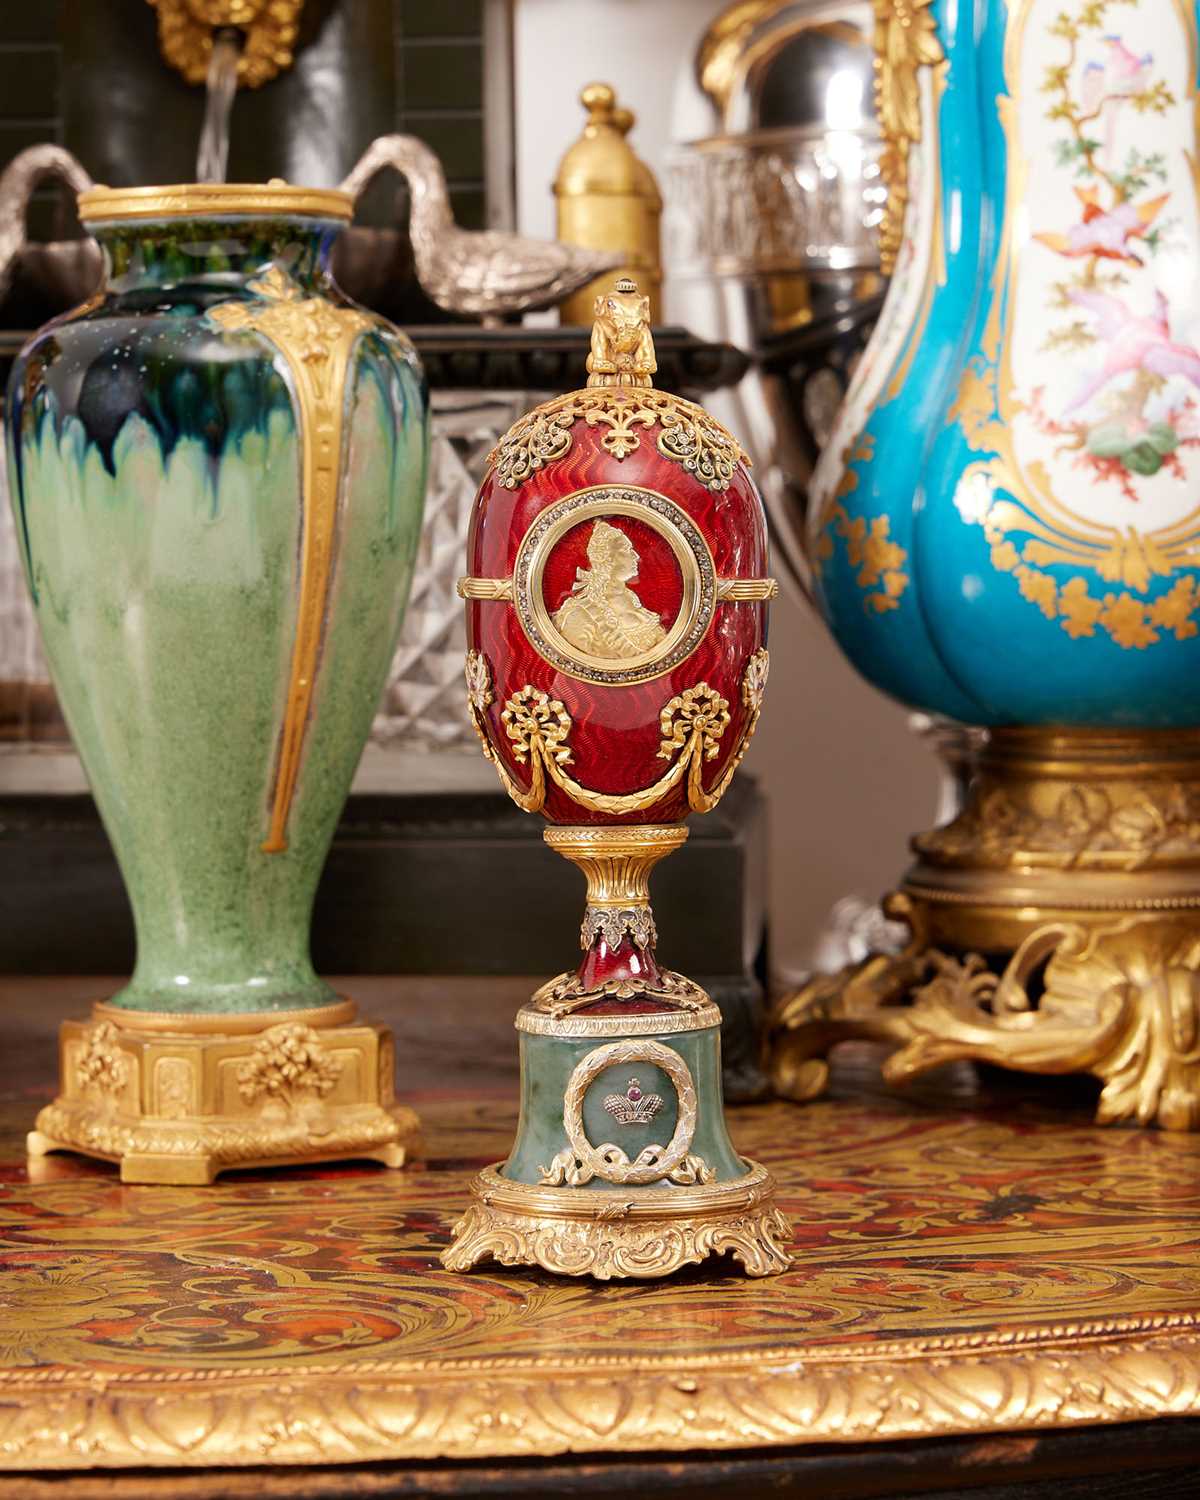 A FABERGE STYLE DIAMOND ENCRUSTED, GUILLOCHE ENAMEL AND SILVER GILT EGG